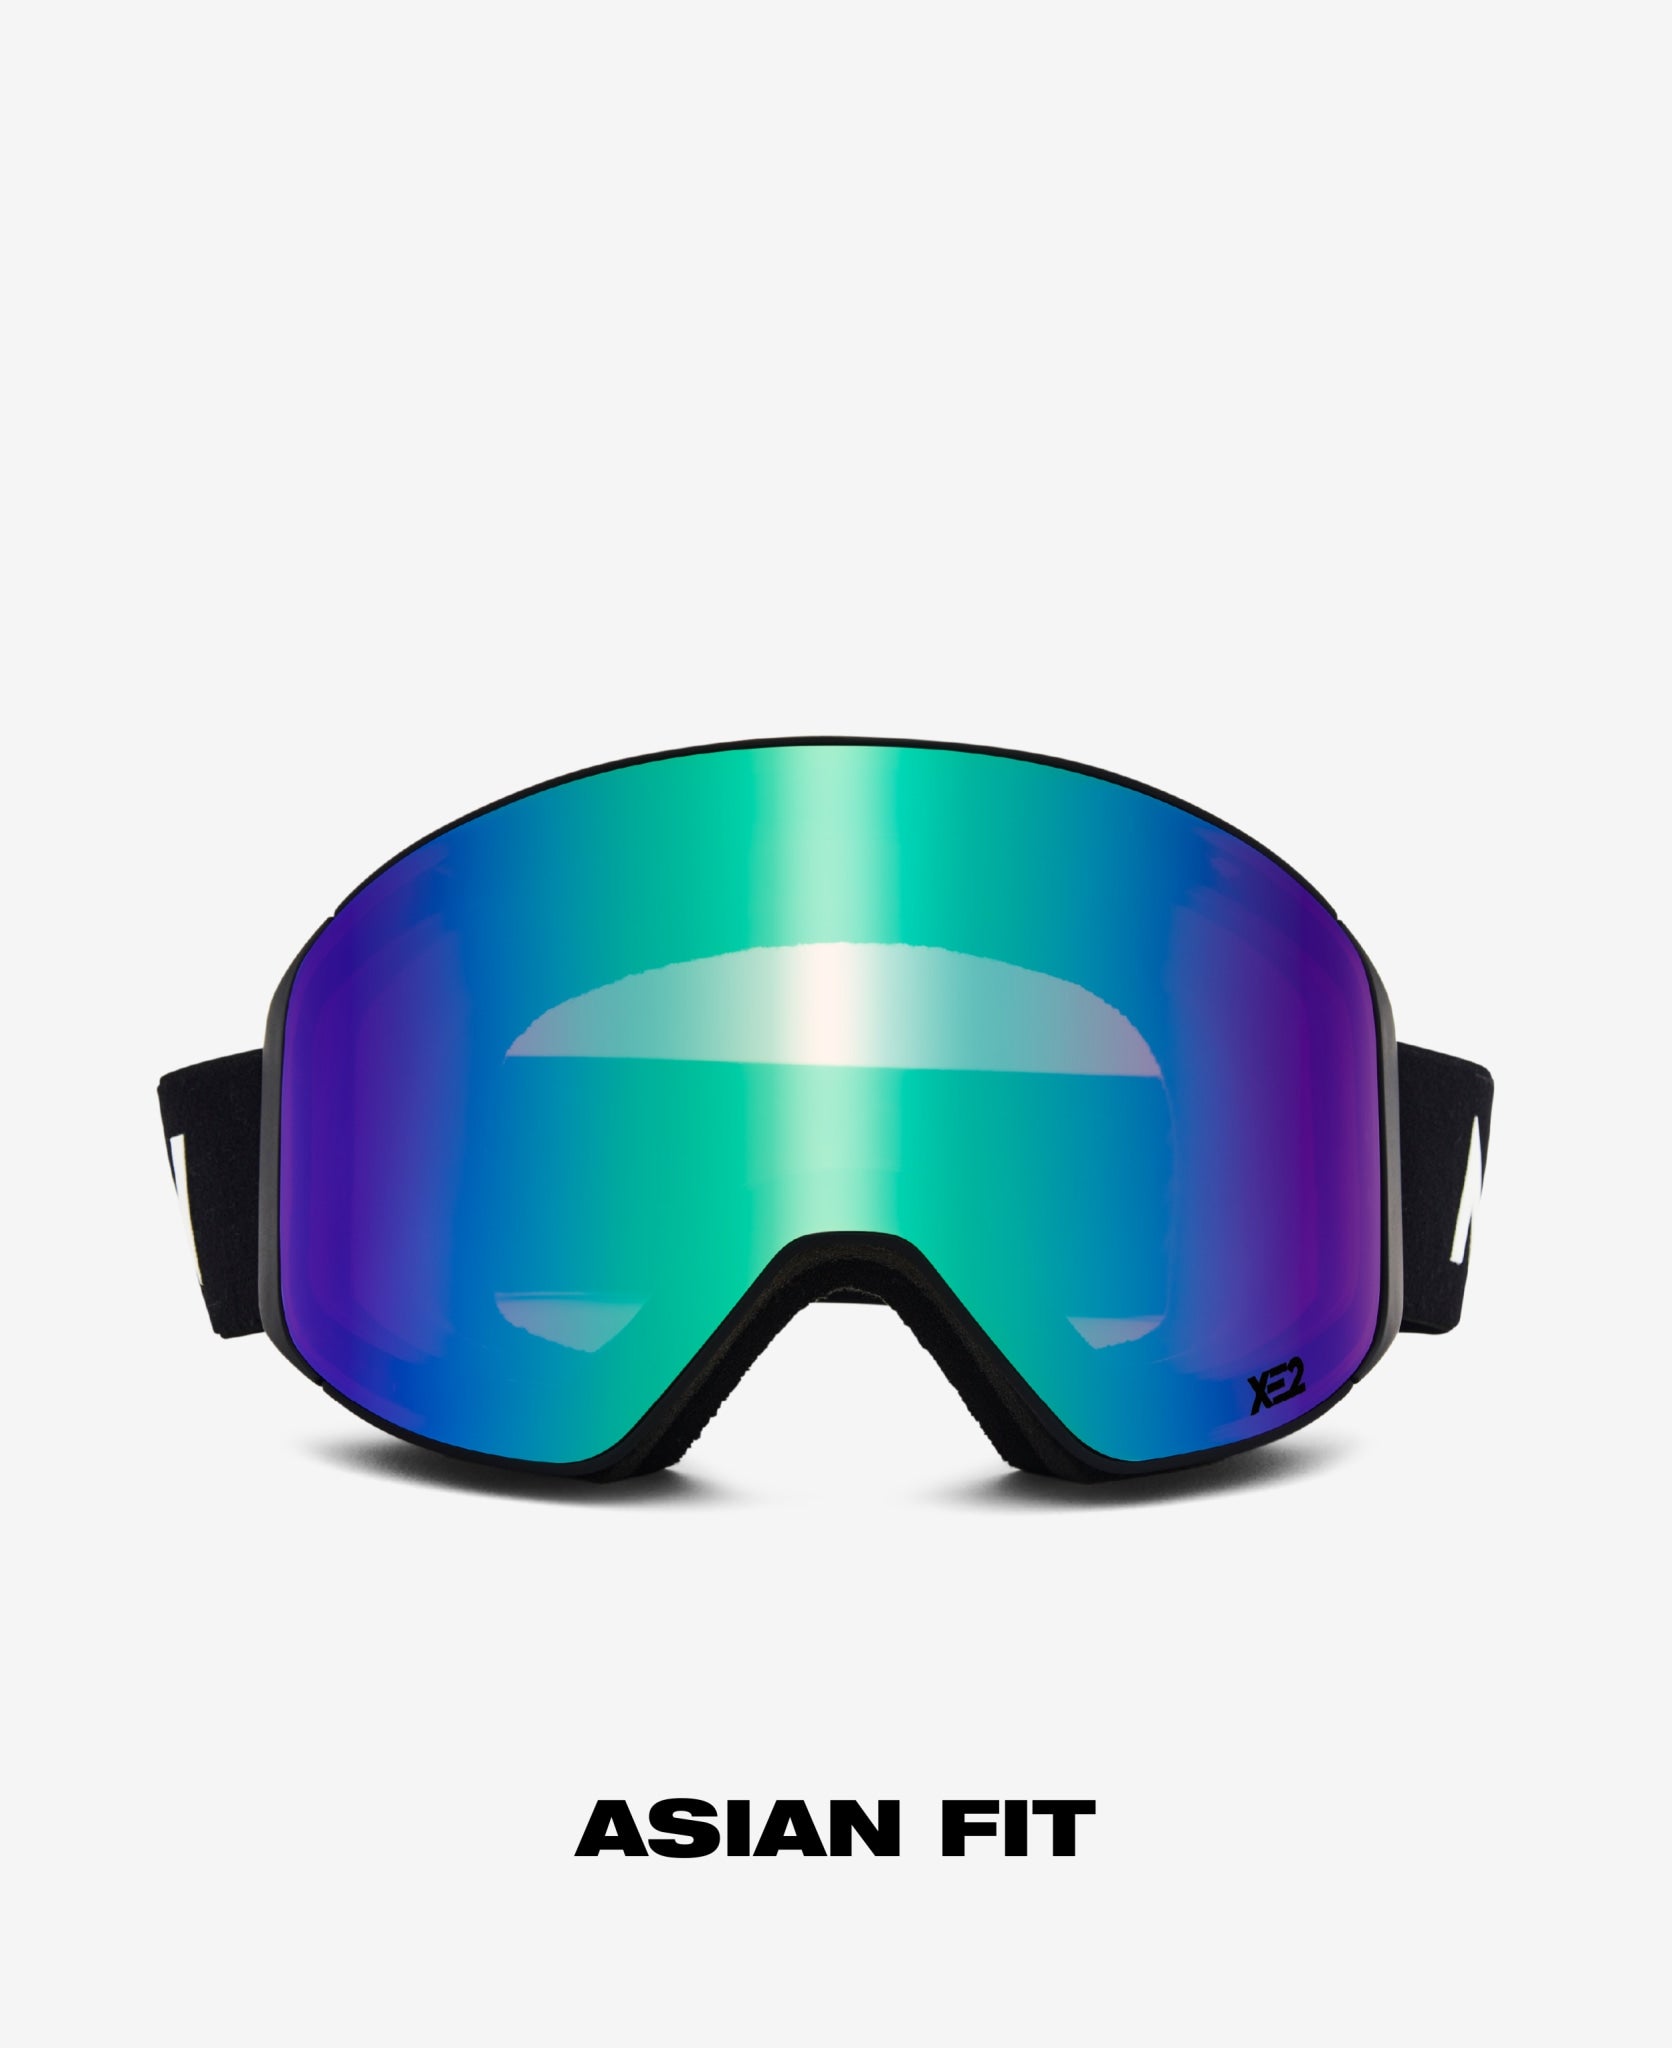 CLEAR XE2 Asian Fit - Black Green Mirrored